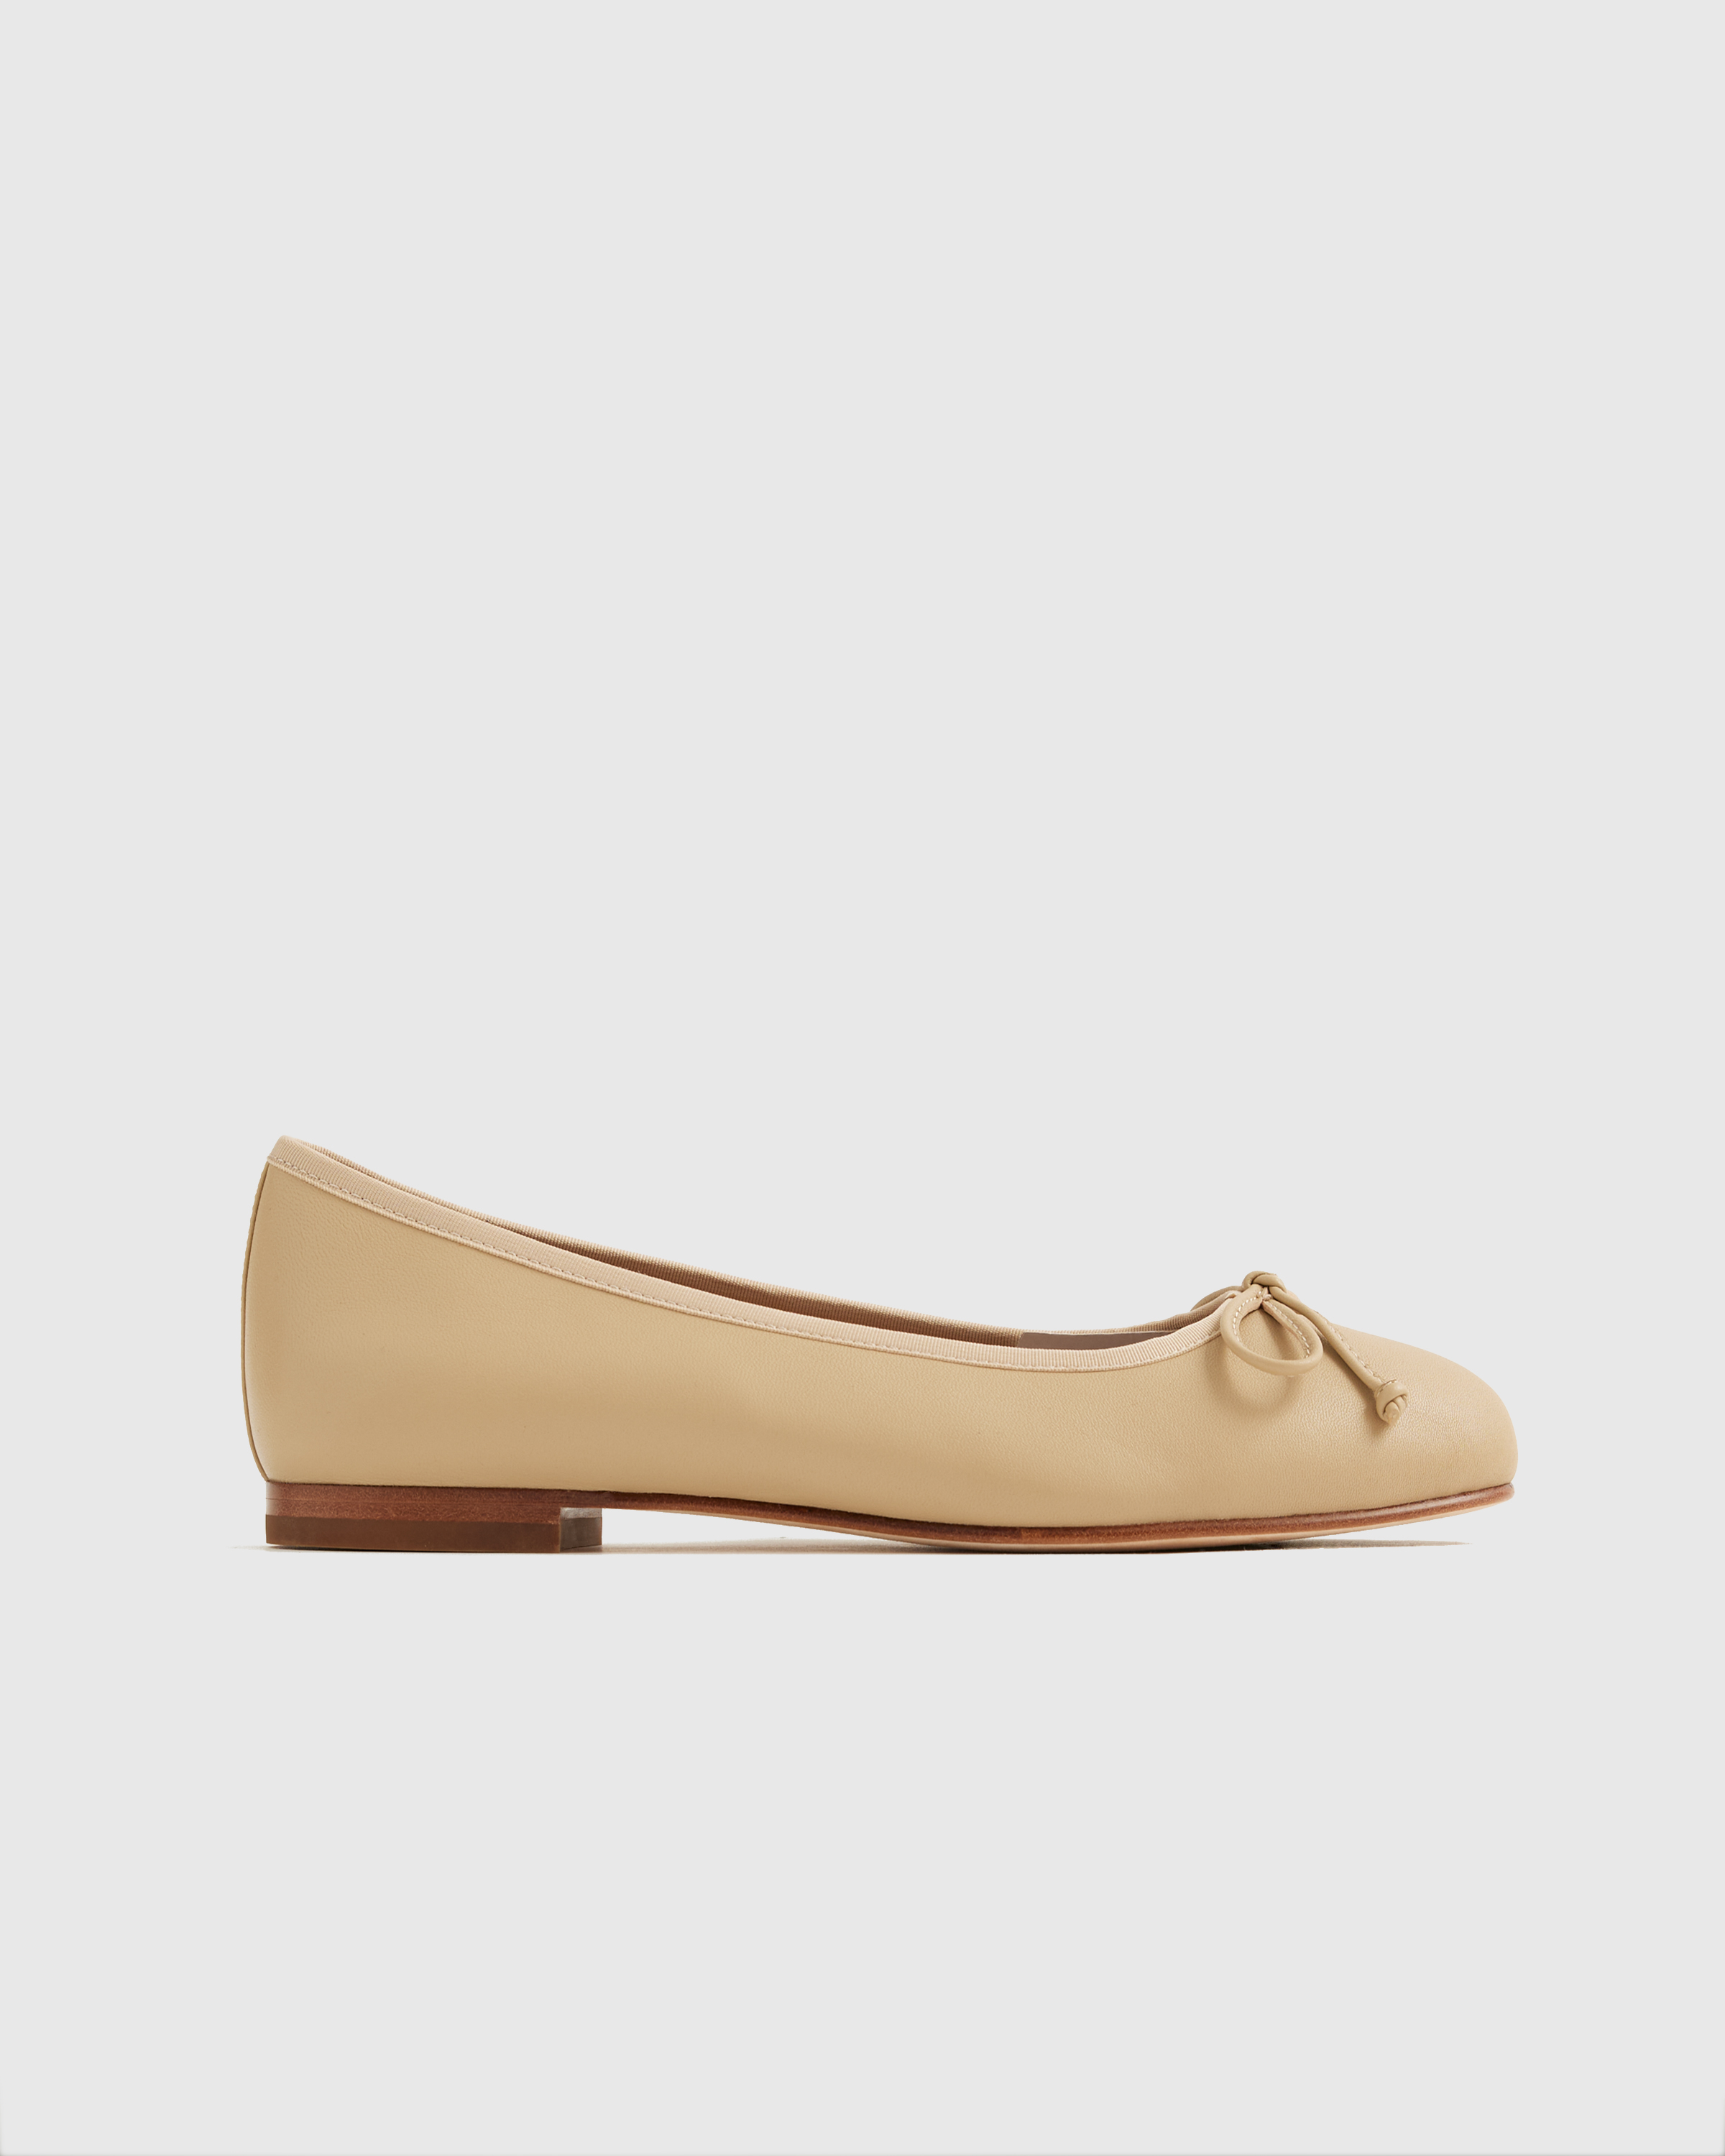 Quince Women's Italian Leather Bow Ballet Flat In Almond